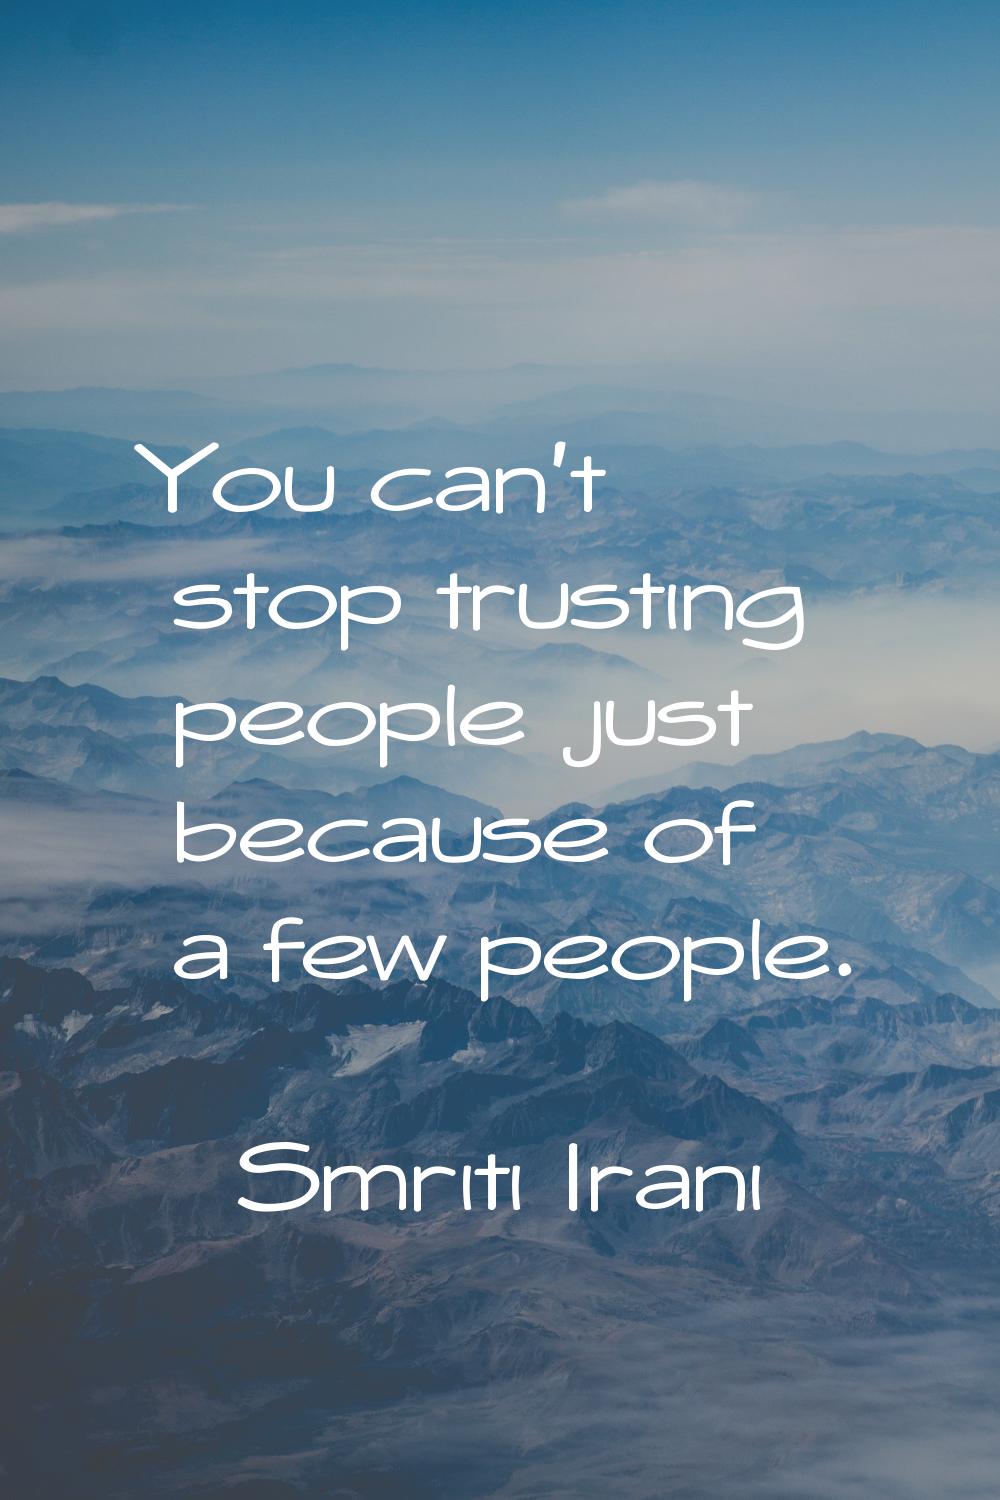 You can't stop trusting people just because of a few people.